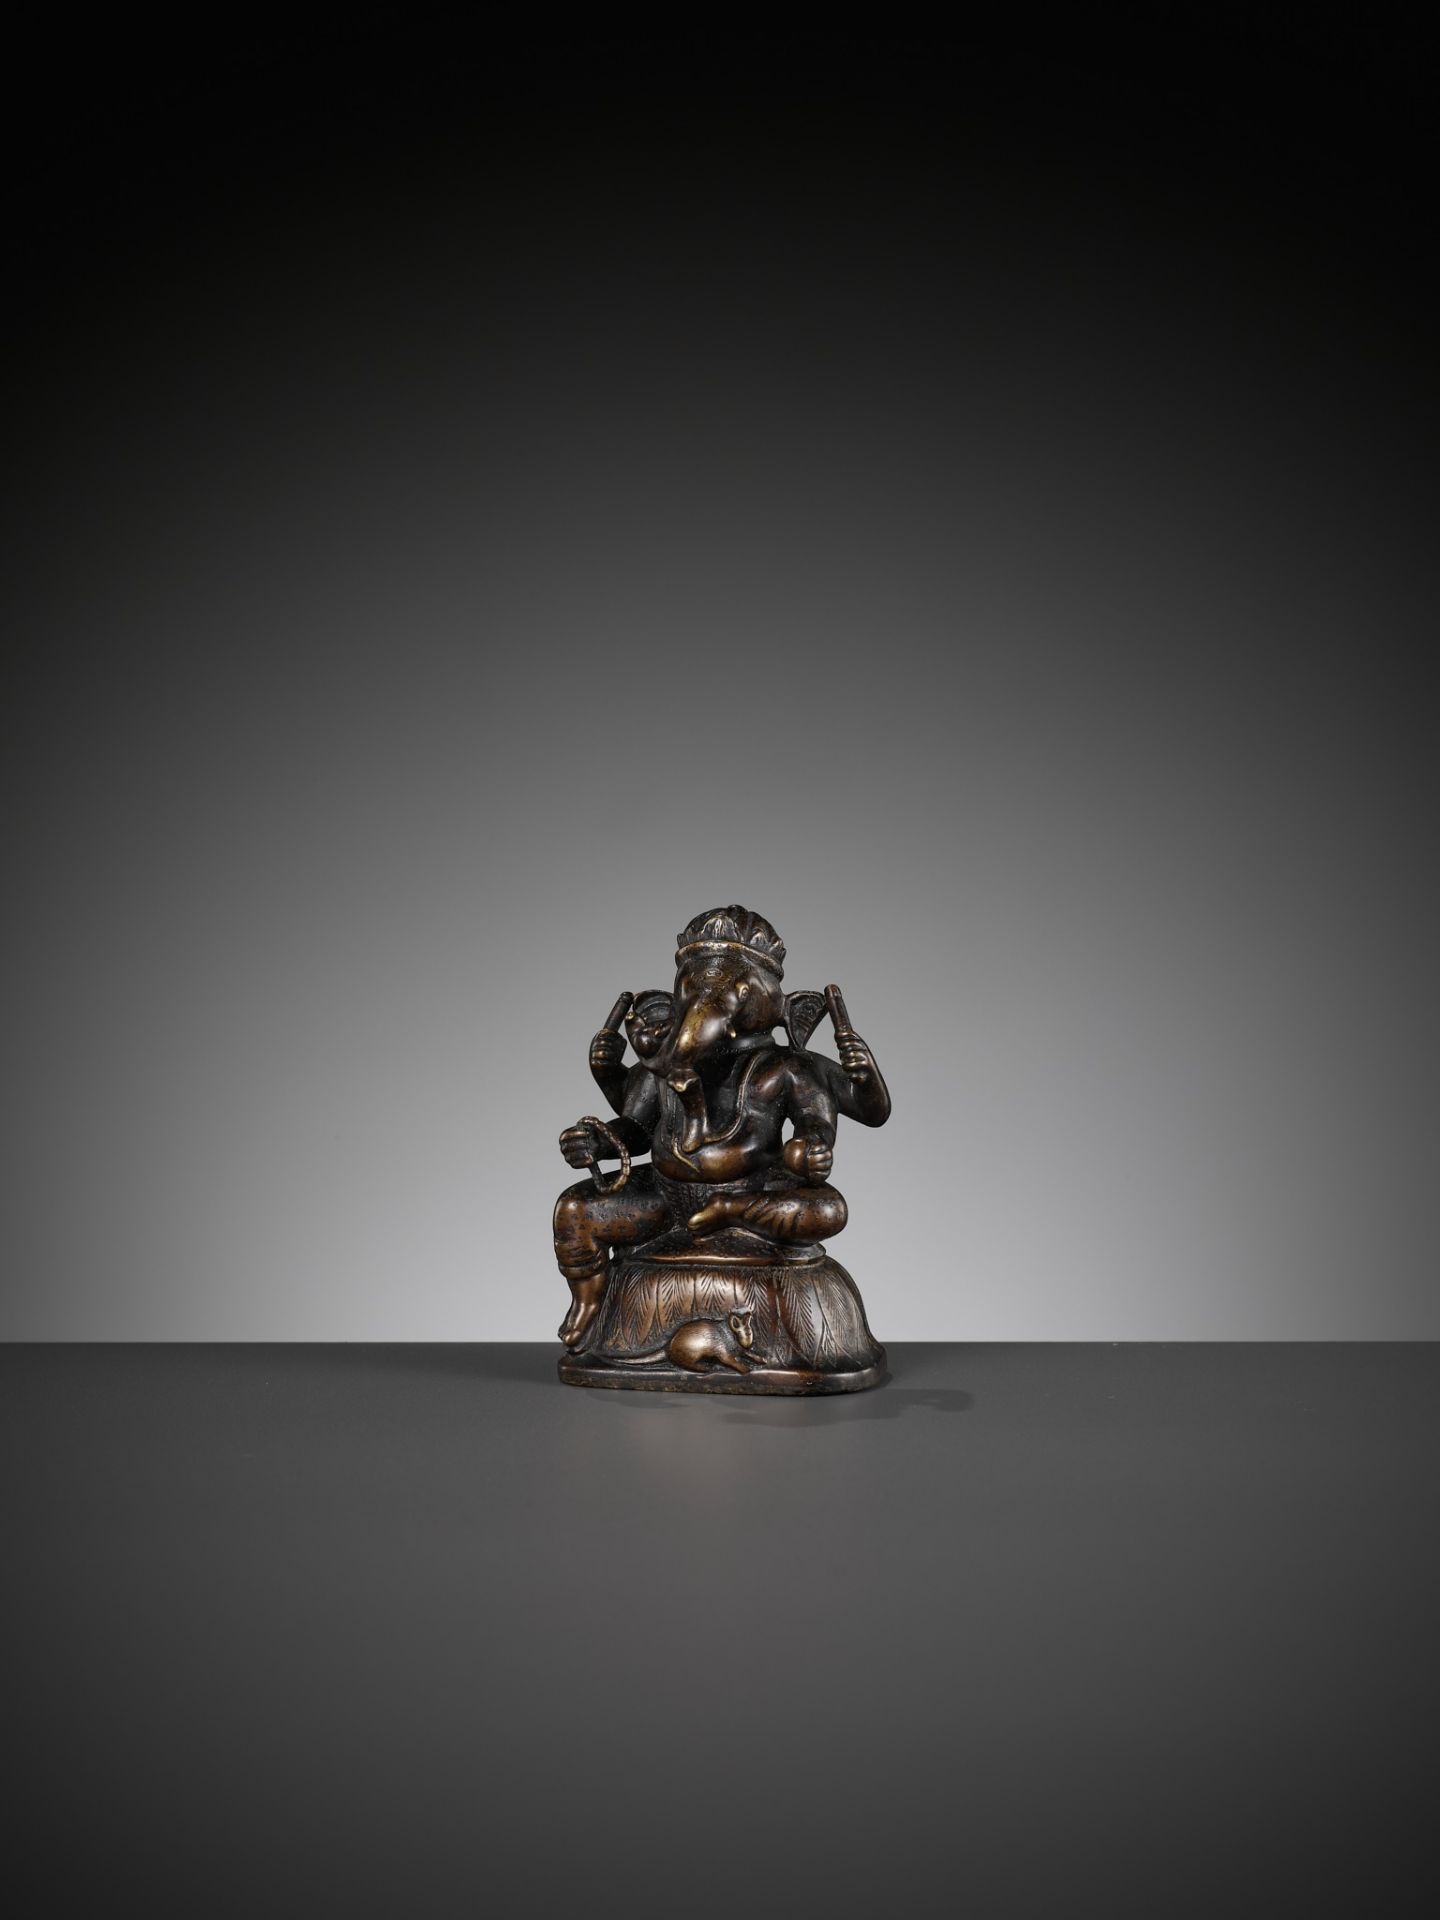 A SMALL BRONZE FIGURE OF GANESHA, SOUTH INDIA, 17TH - 18TH CENTURY - Image 8 of 14